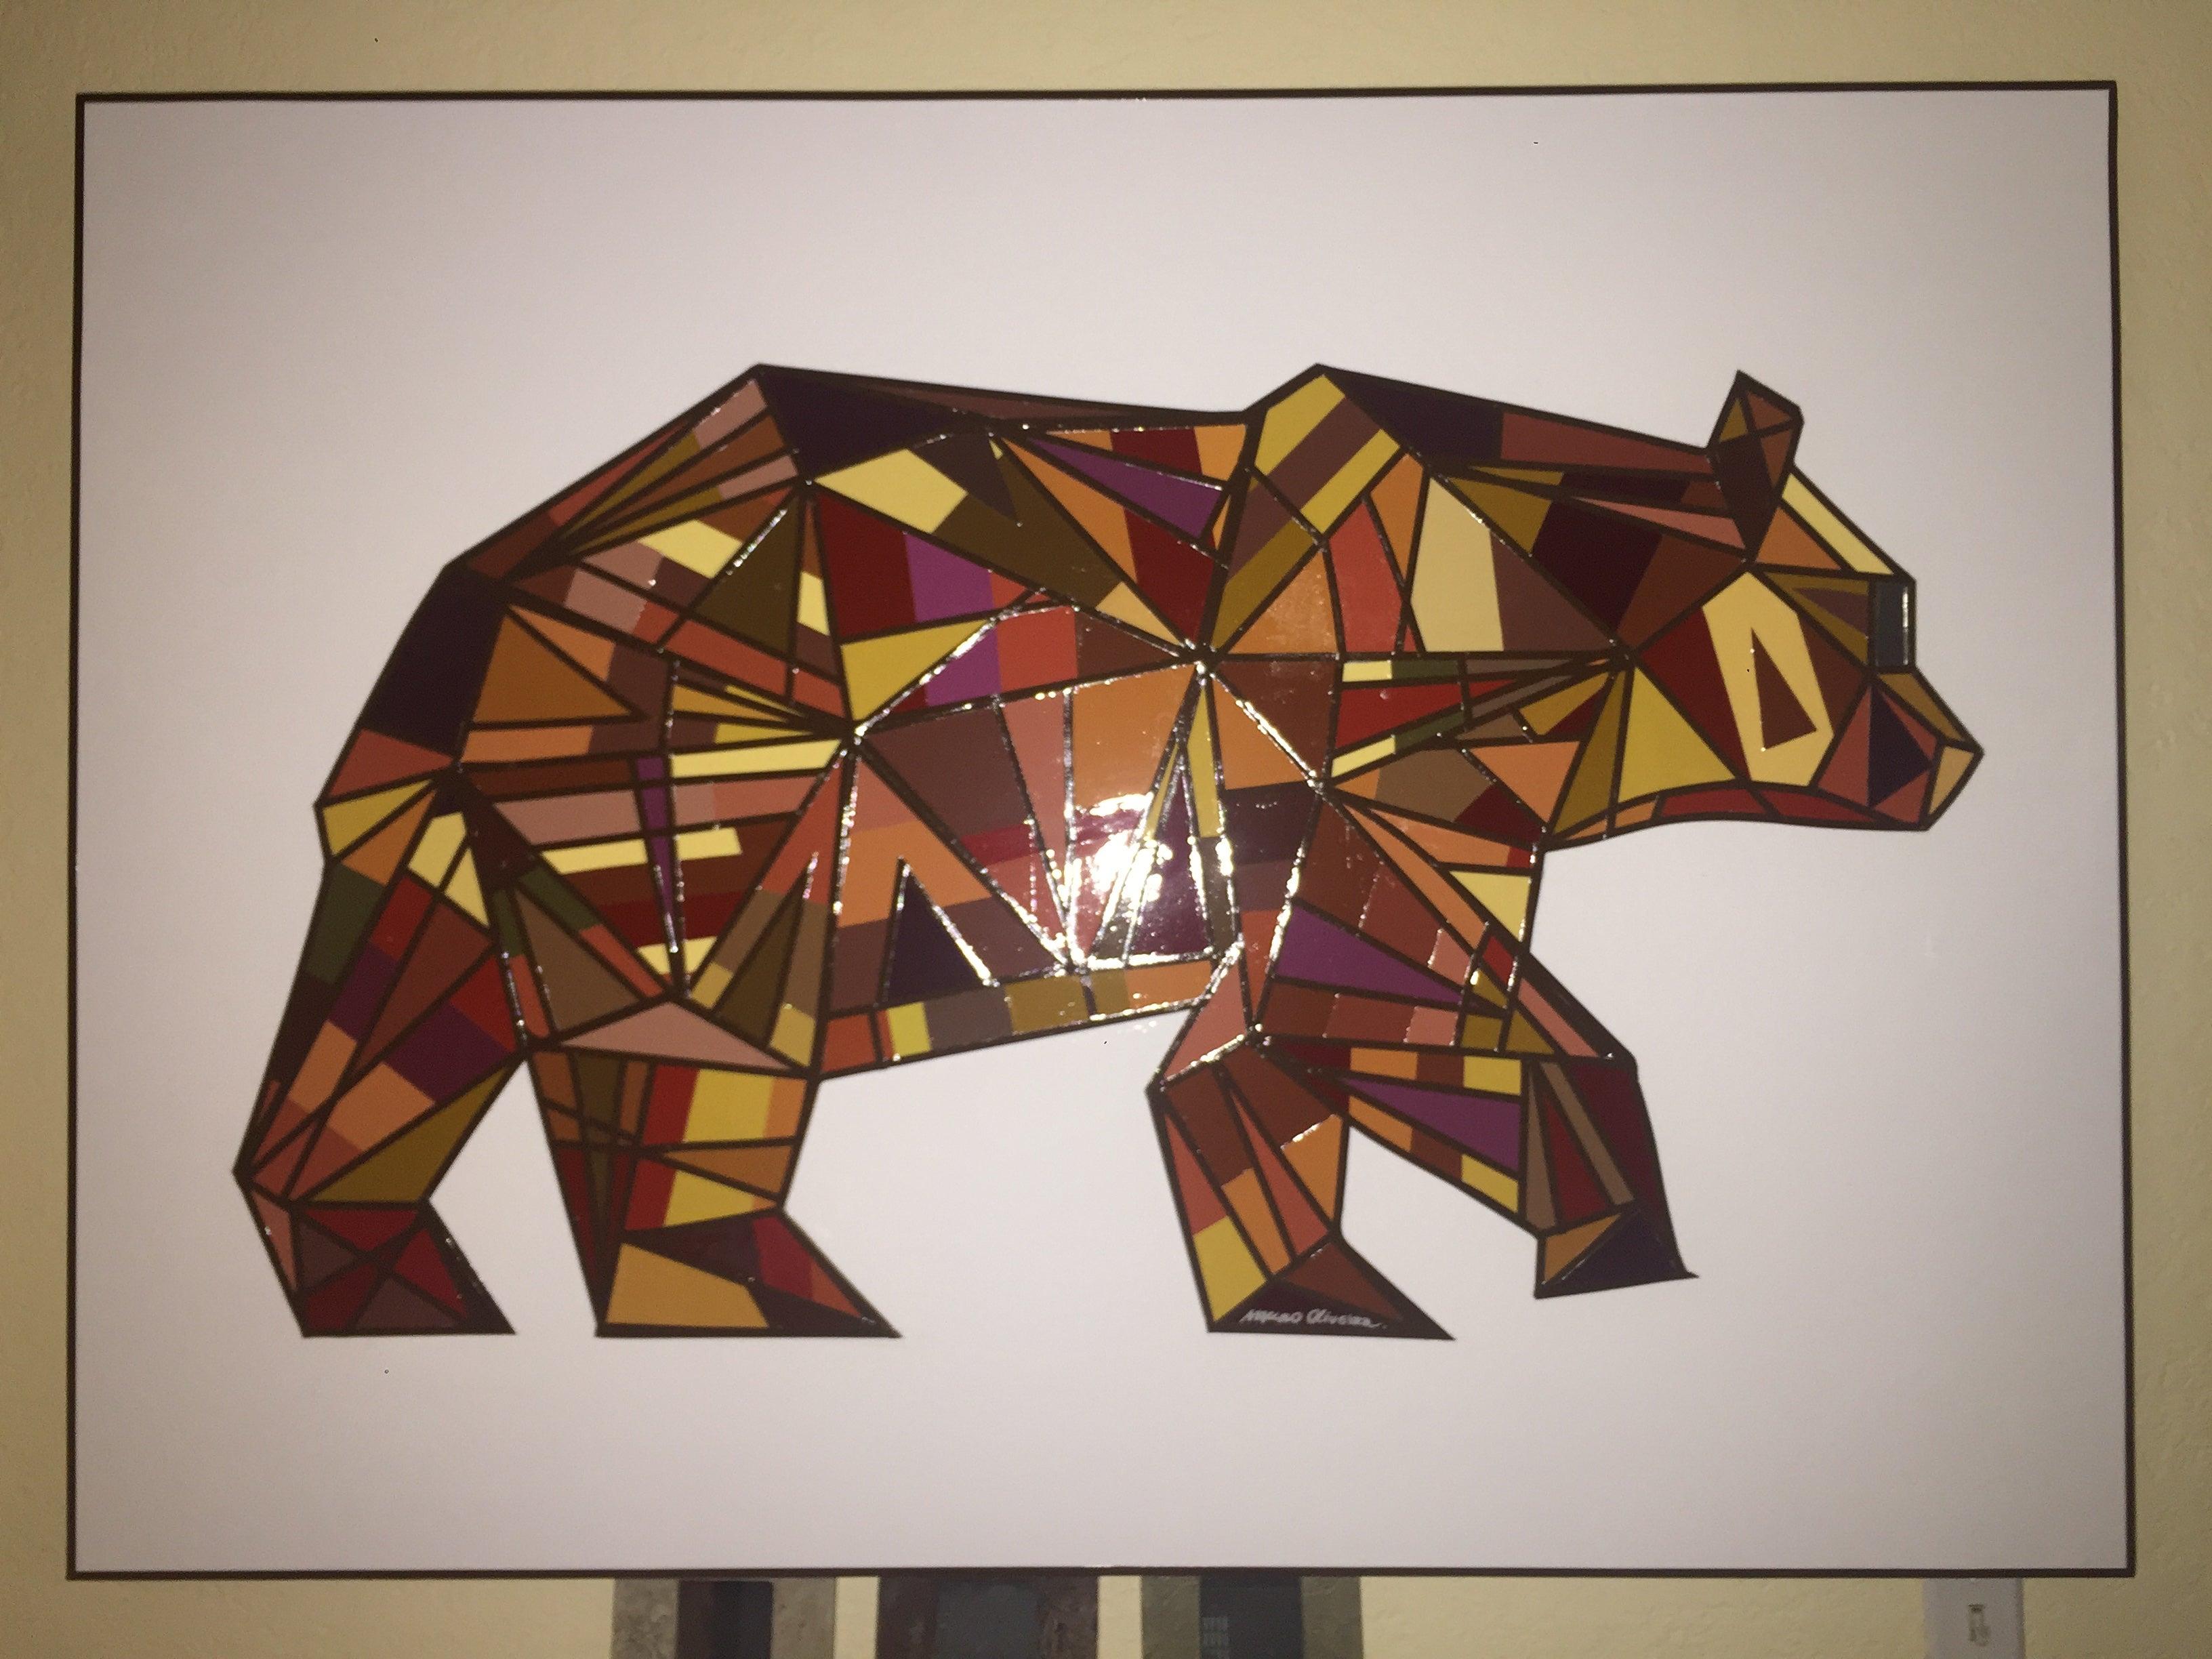 **HOLIDAY SEASON SALE UNTIL CHRISTMAS** Take Advantage Of This Limited Time Sale!!!!

This original California Lucky Bear design is composed of mosaic sections and each section is glued with different color samples on wood panel. A few coats of a